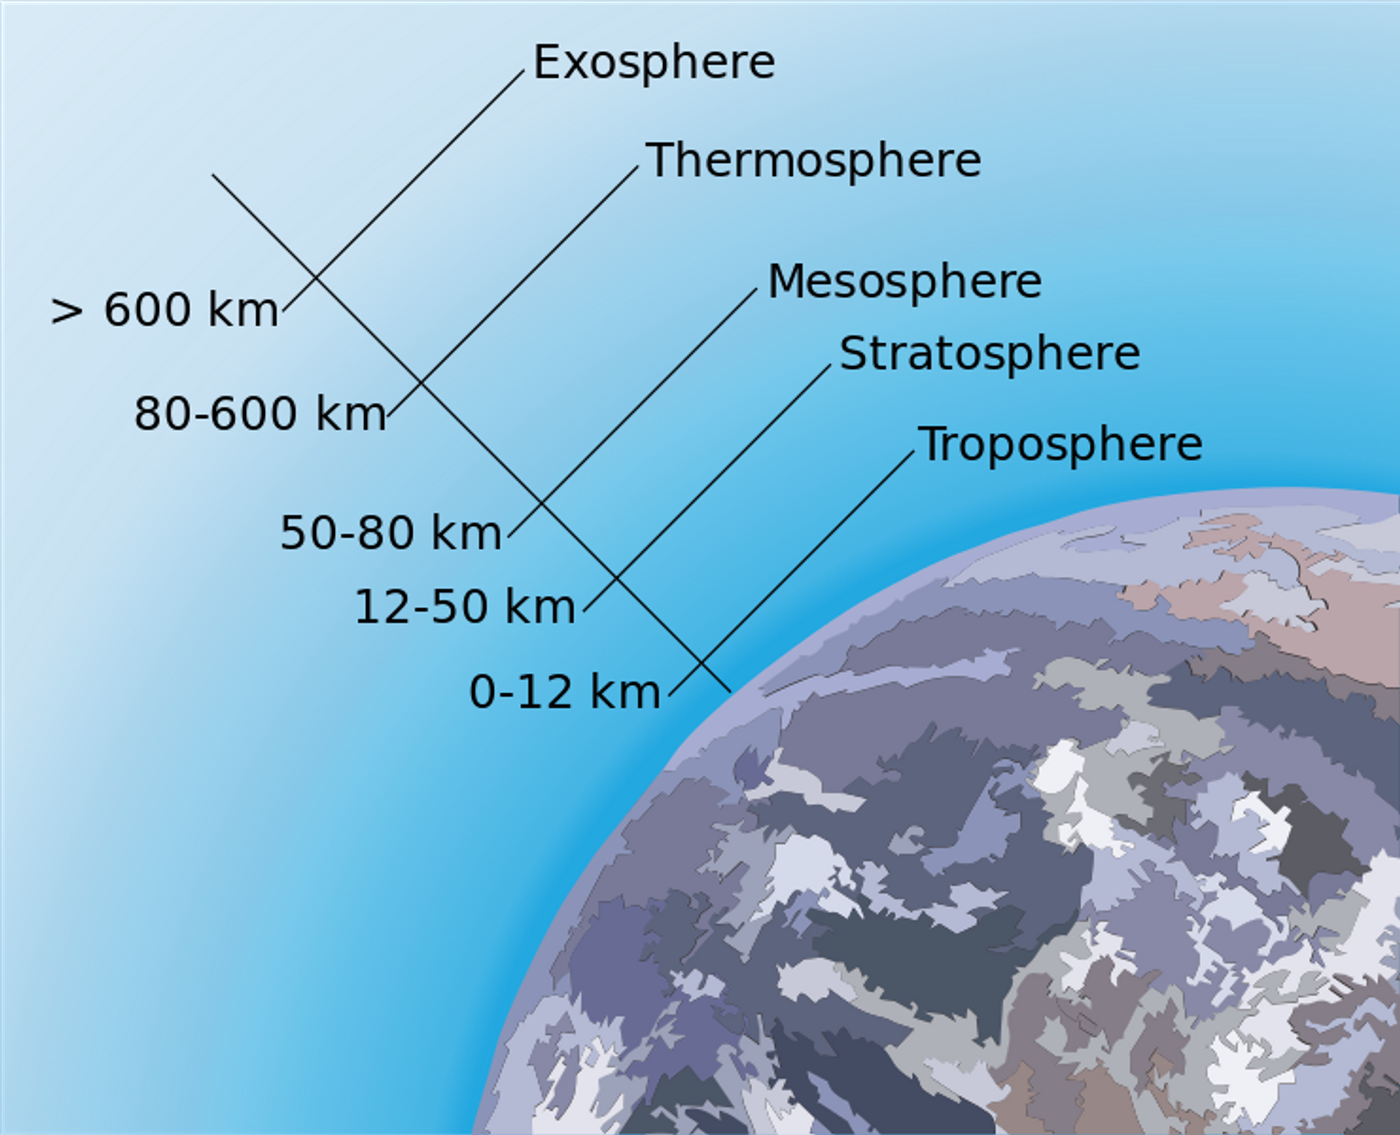 Earth's Atmosphere, credit: public domain